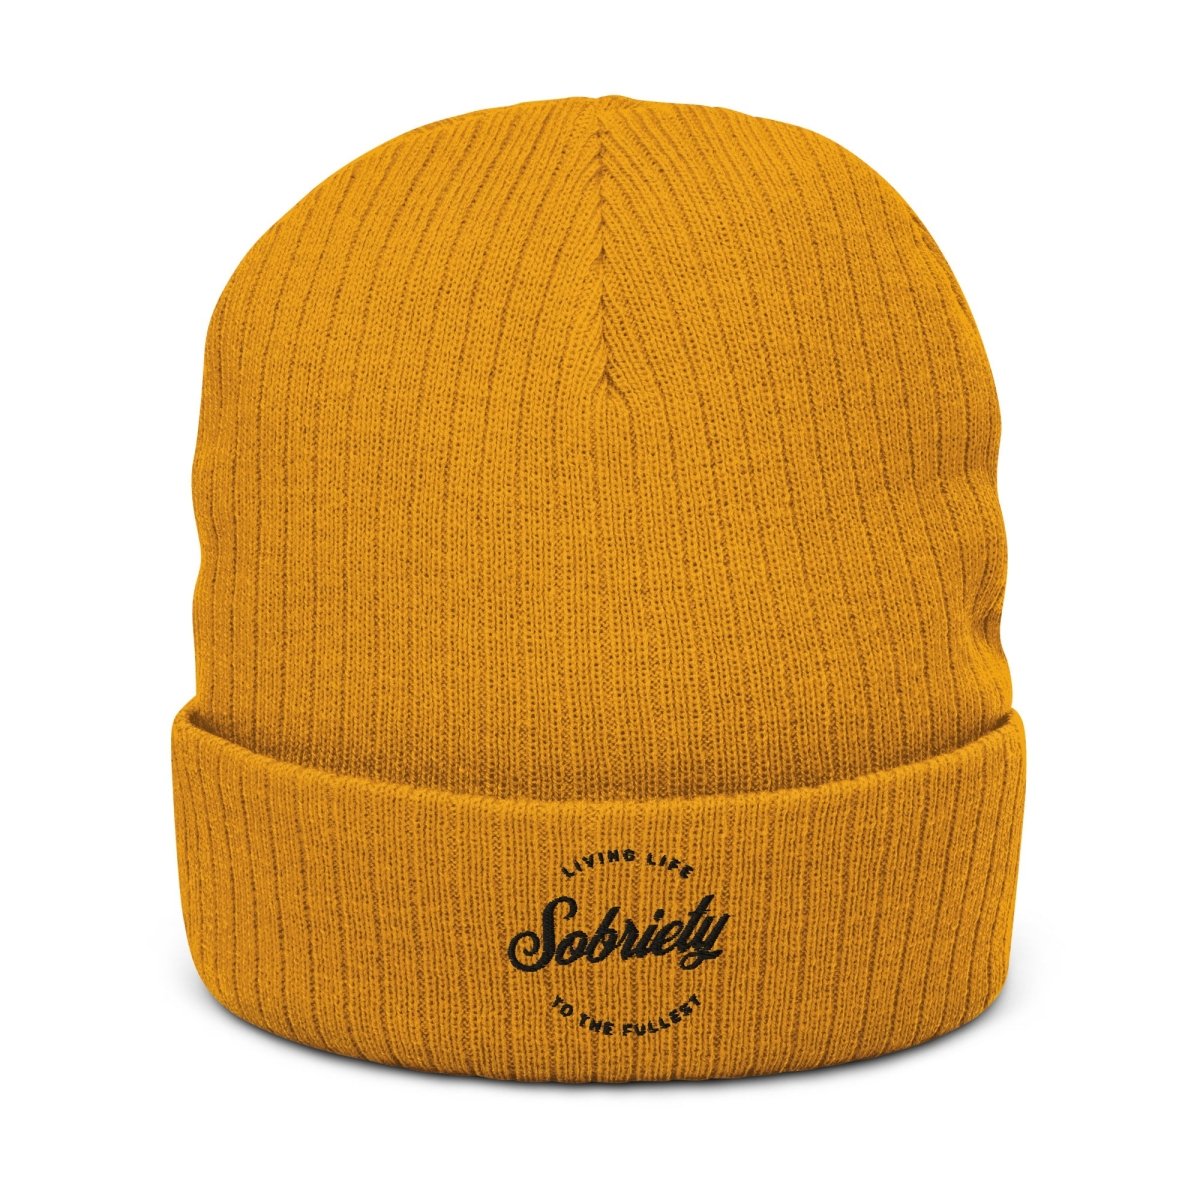 Sobriety: Living Life to the Fullest Embroidered Beanie - Sobervation